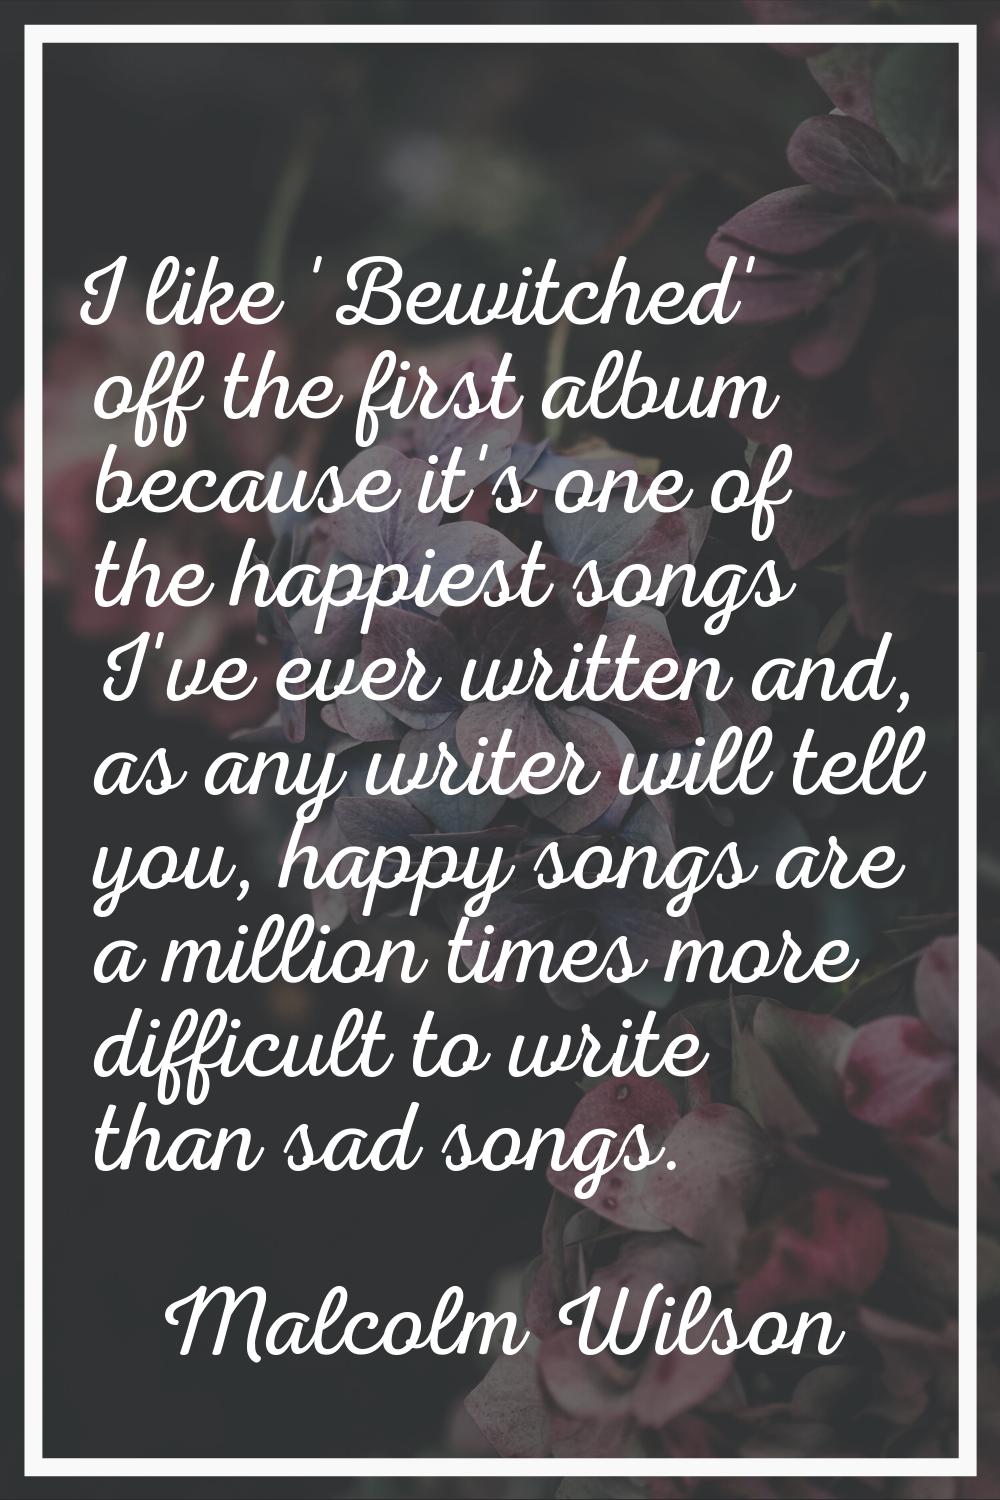 I like 'Bewitched' off the first album because it's one of the happiest songs I've ever written and